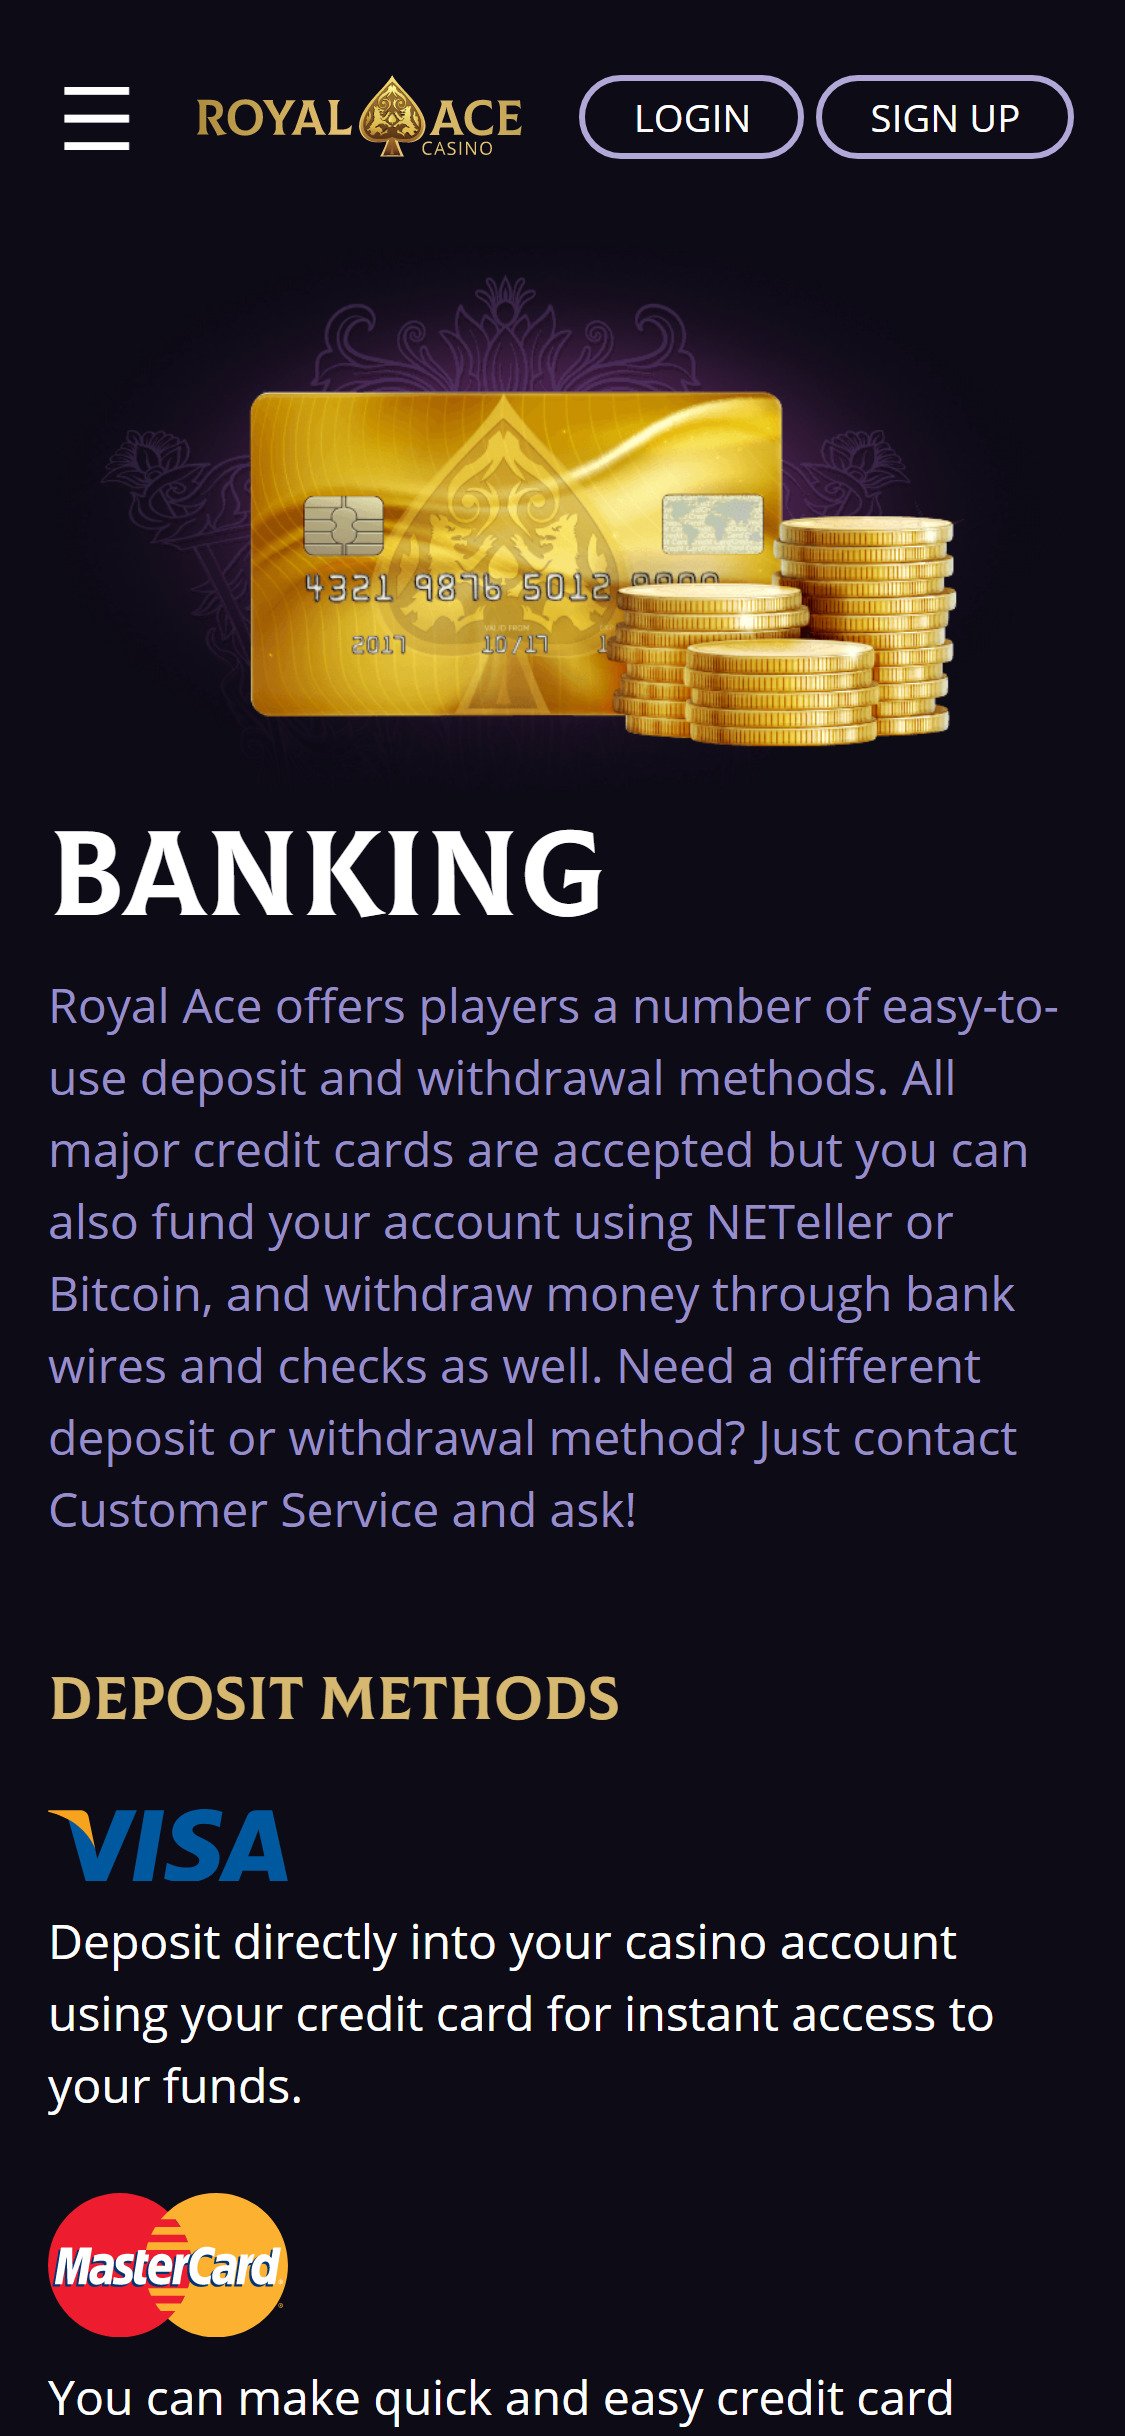 Royal Ace Casino Mobile Payment Methods Review